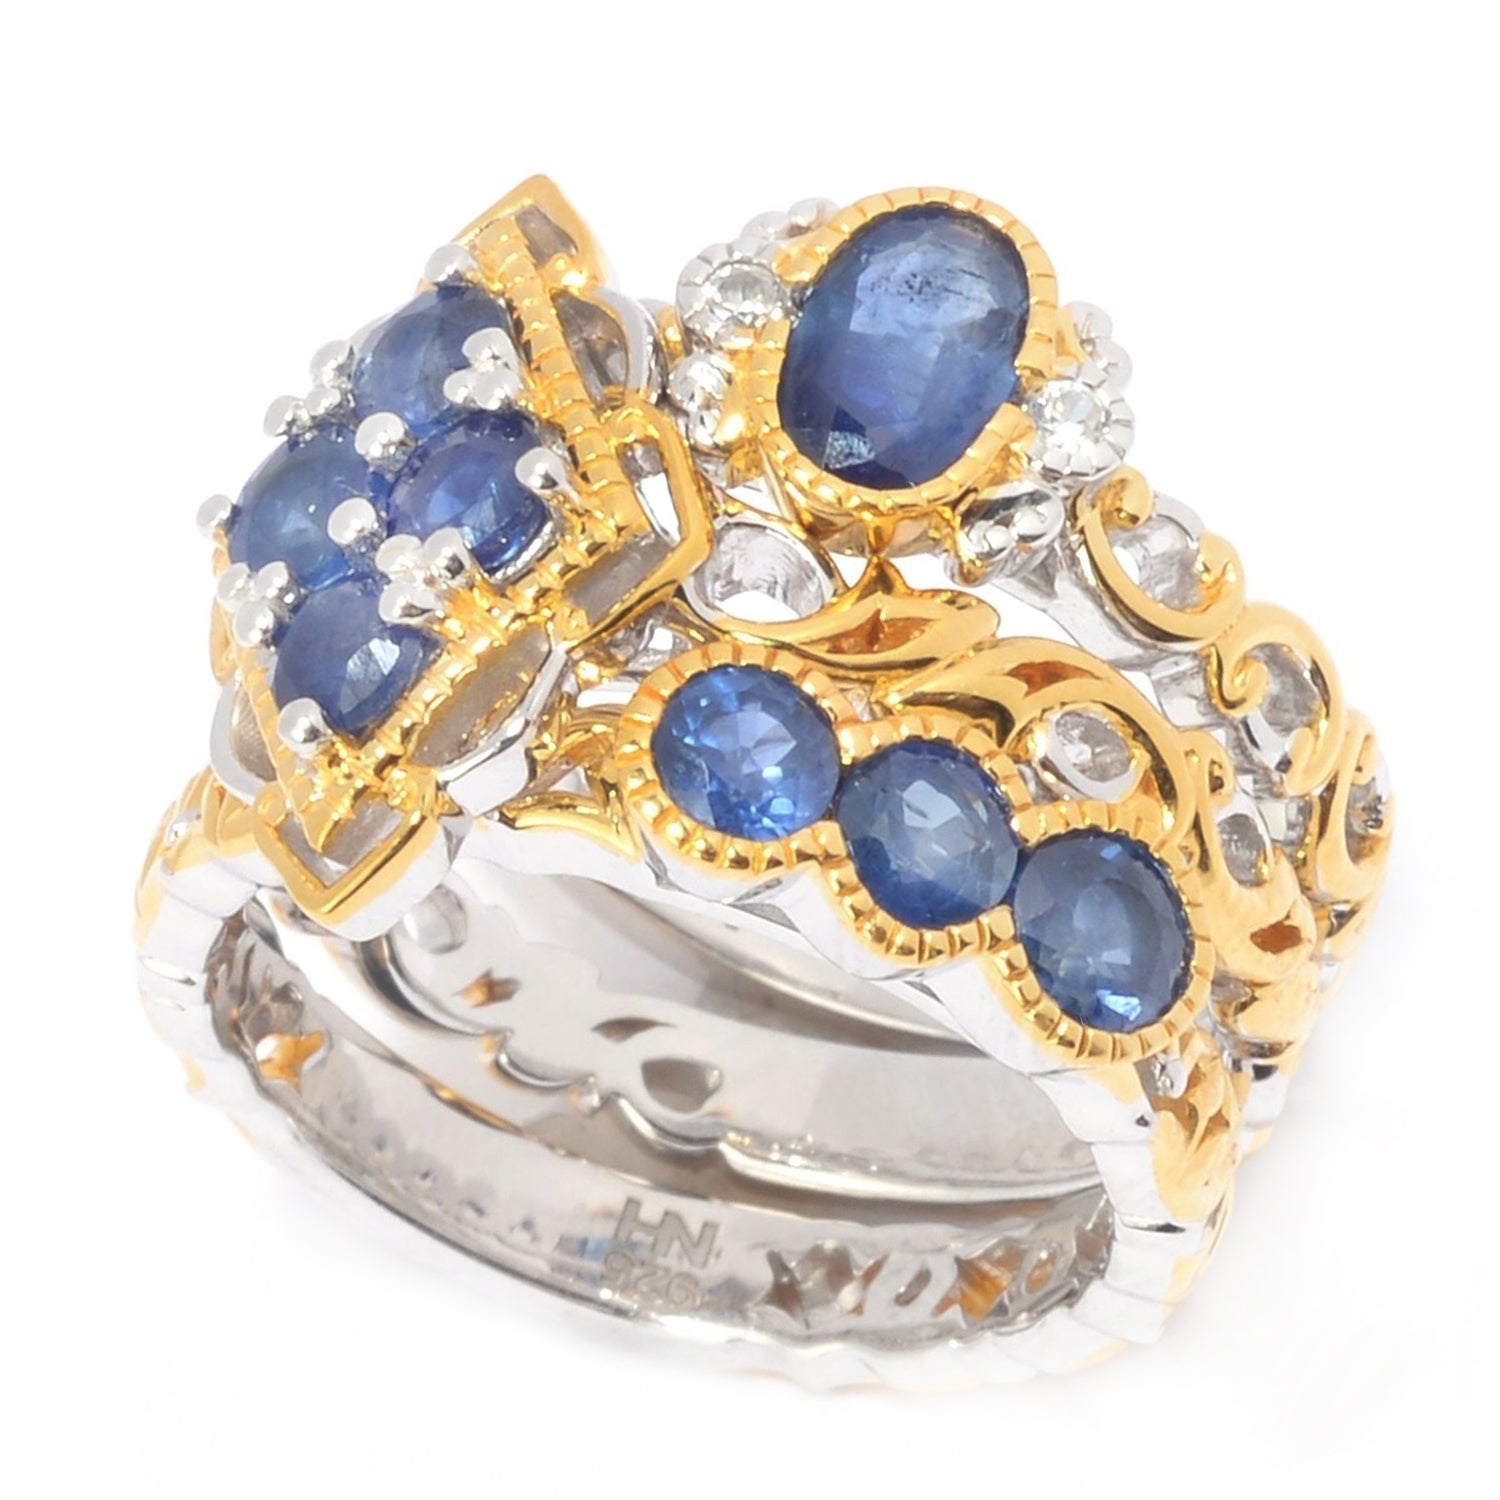 Gems en Vogue 2.01ctw Set of Three Royal Blue Sapphire & White Zircon Stack Rings - CANNOT BE RESIZED.